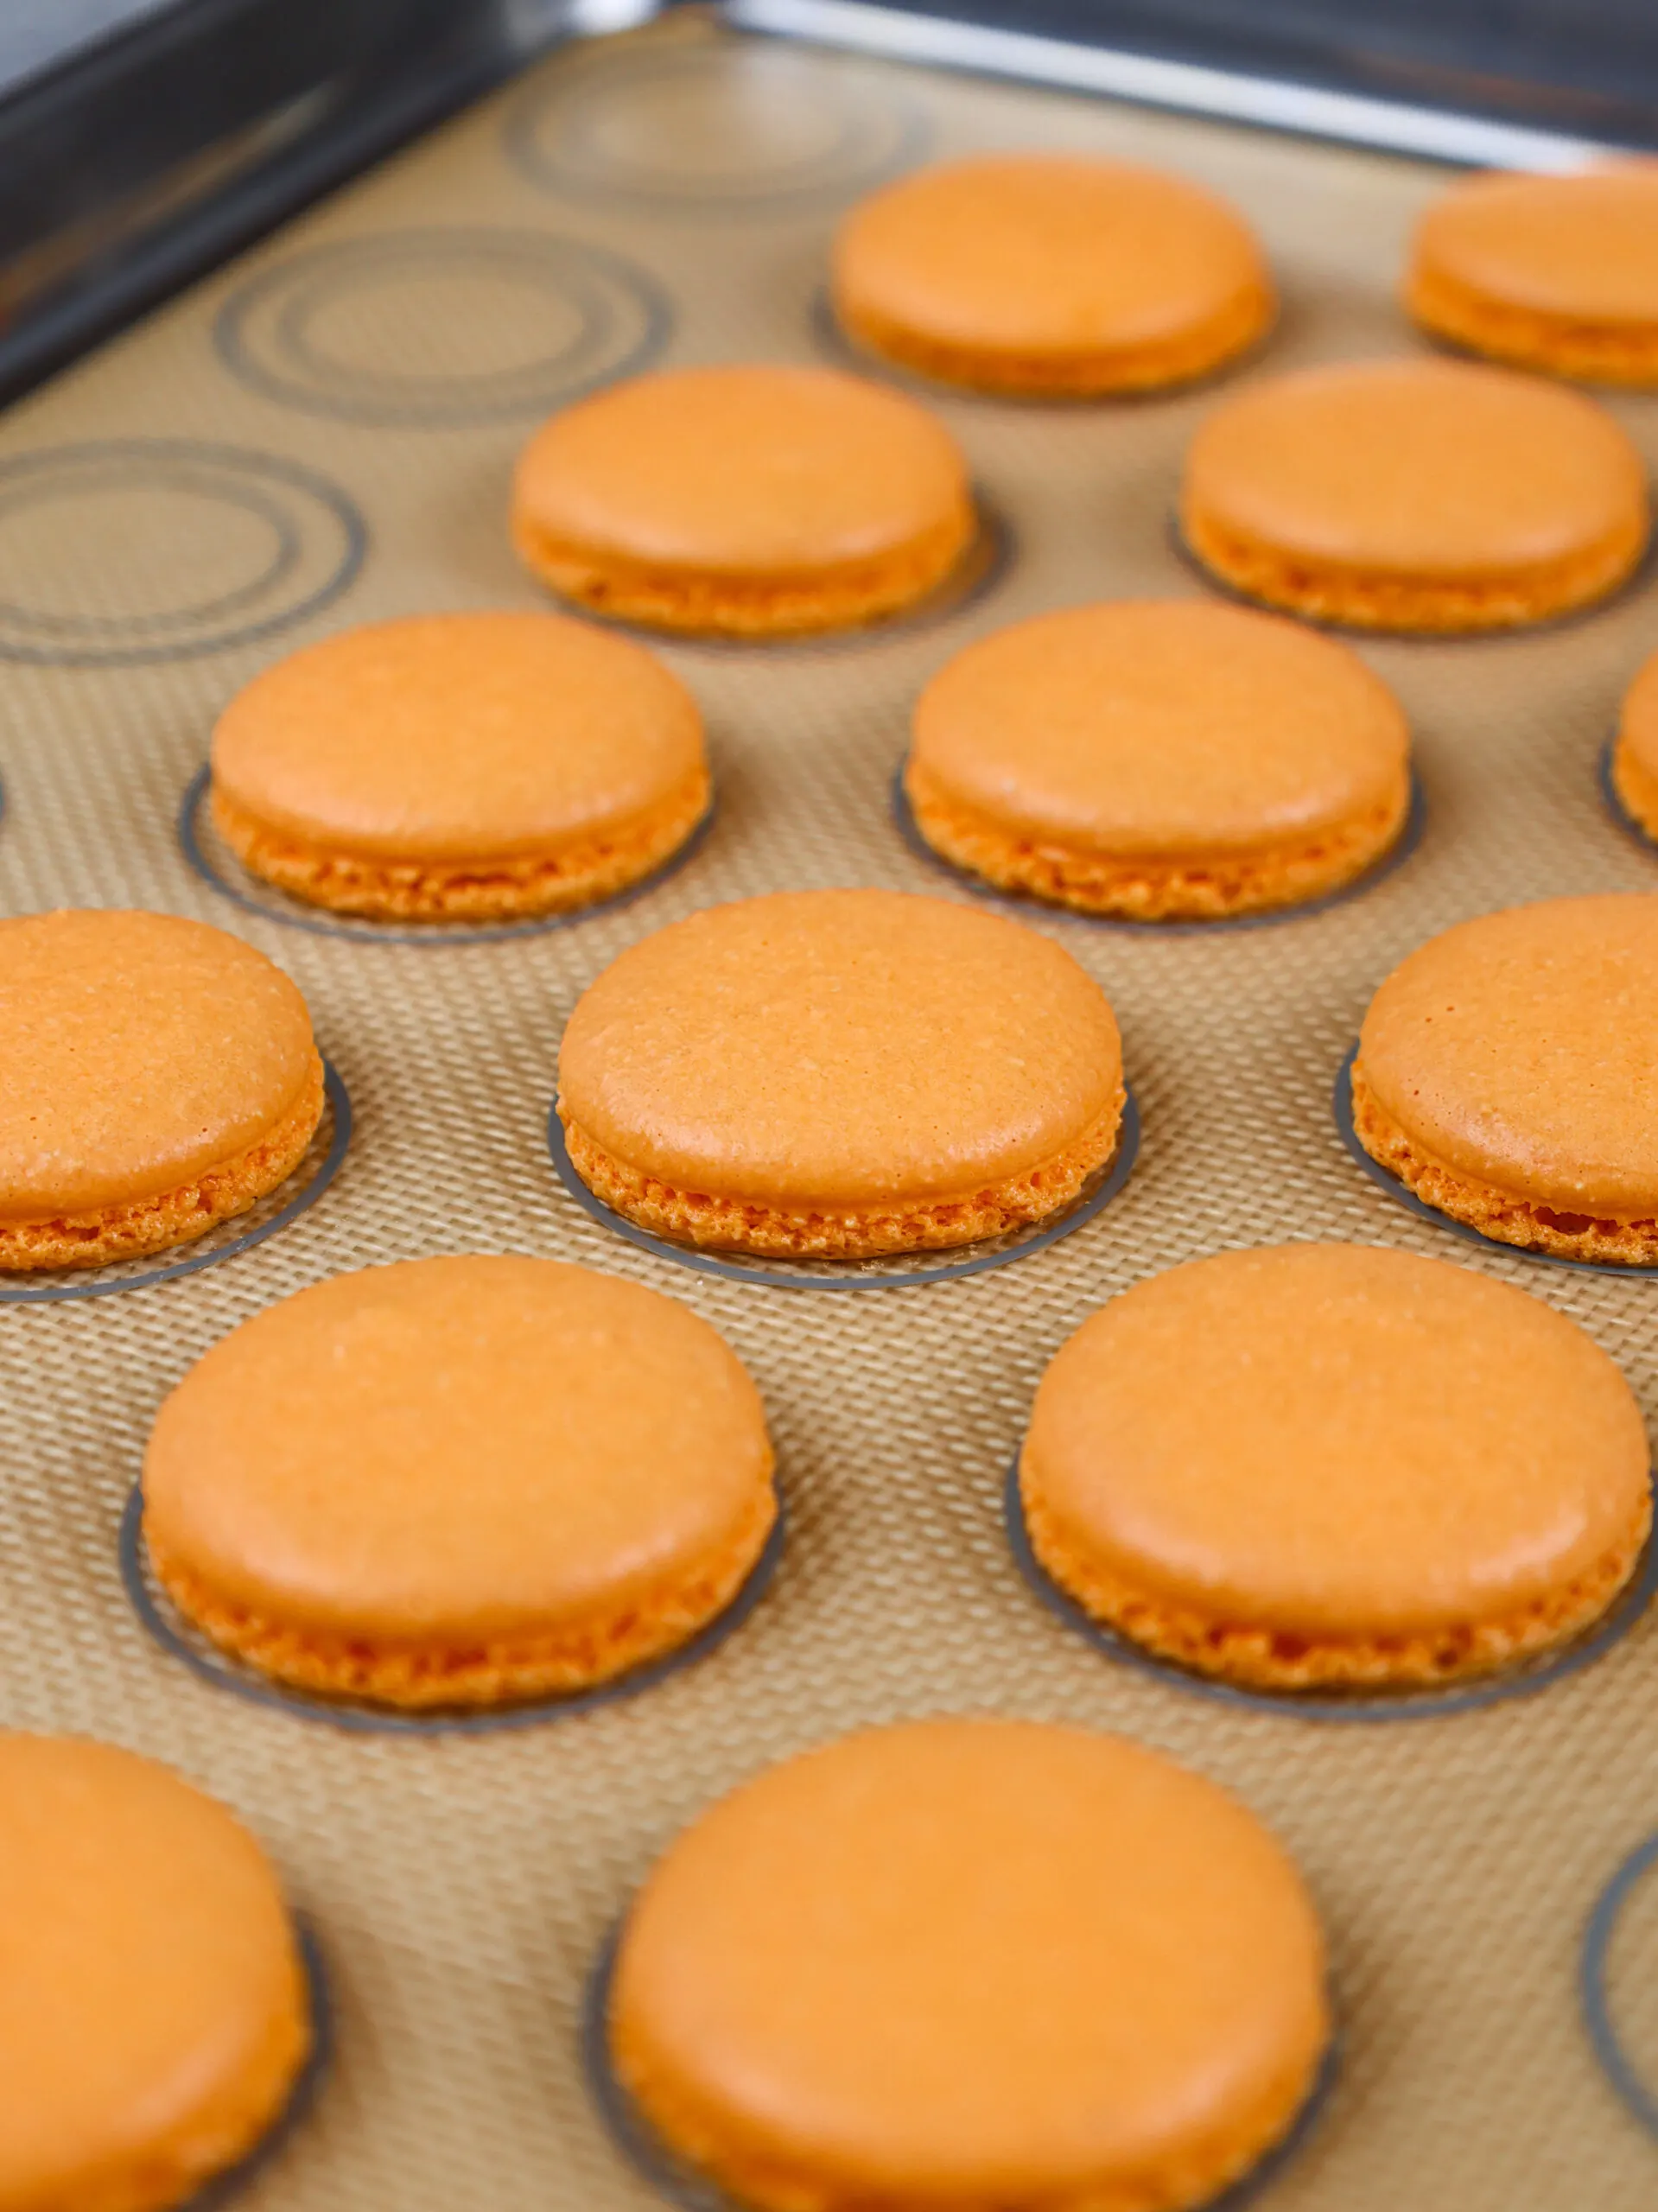 image of orange macaron shells that have been baked and have proper feet